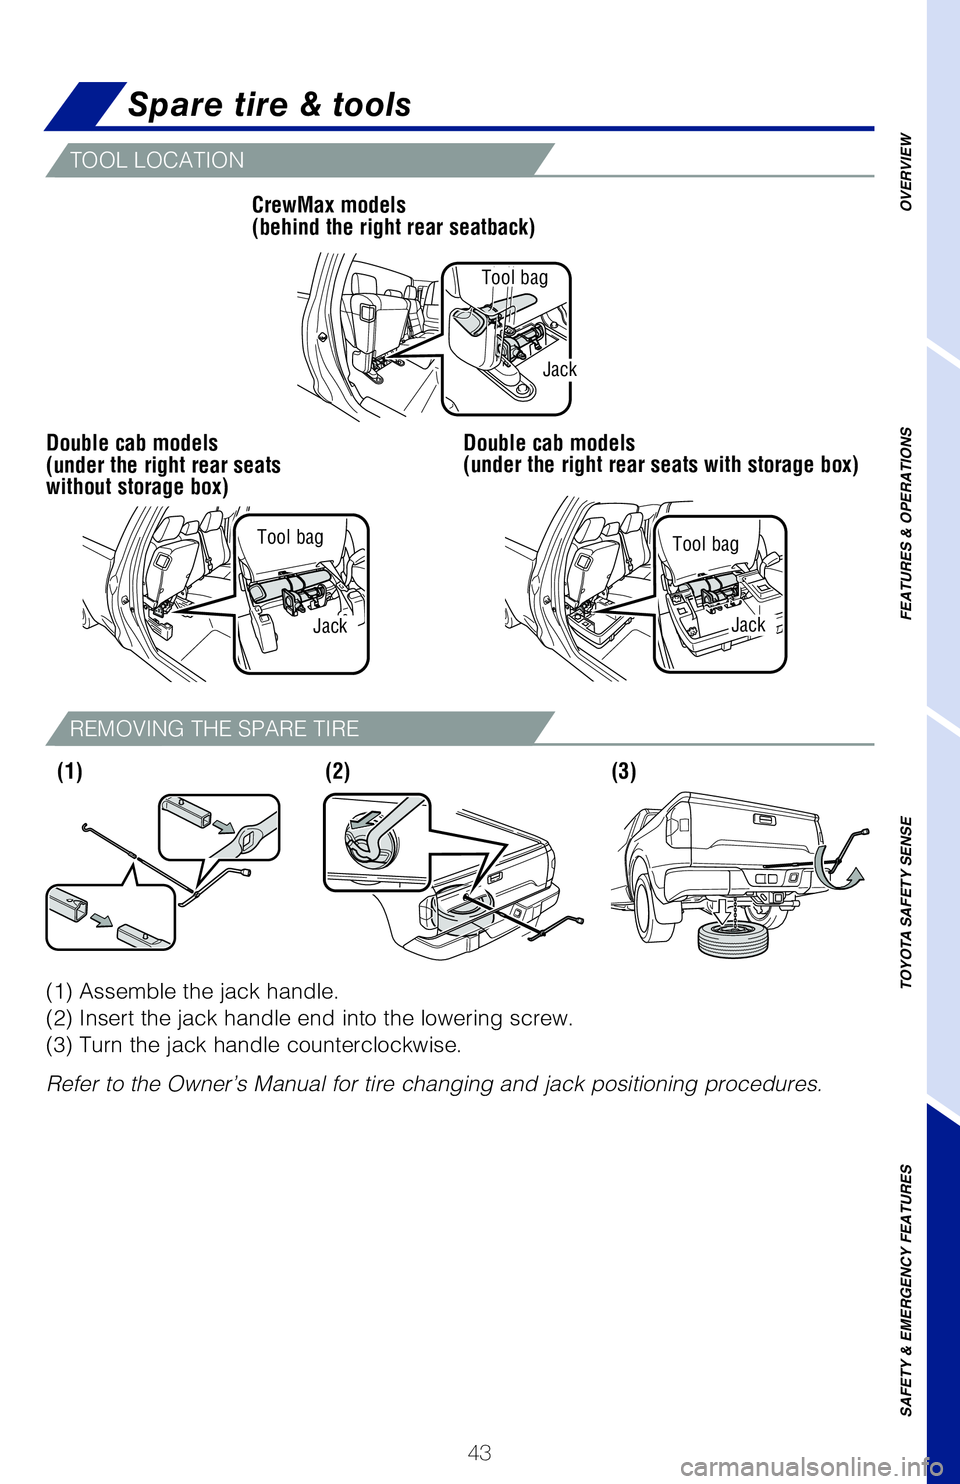 TOYOTA TUNDRA 2020  Owners Manual (in English) 43
Spare tire & tools
TOOL LOCATION
REMOVING THE SPARE TIRE
(1) Assemble the jack handle. 
(2) Insert the jack handle end into the lowering screw.
(3) Turn the jack handle counterclockwise. 
Refer to 